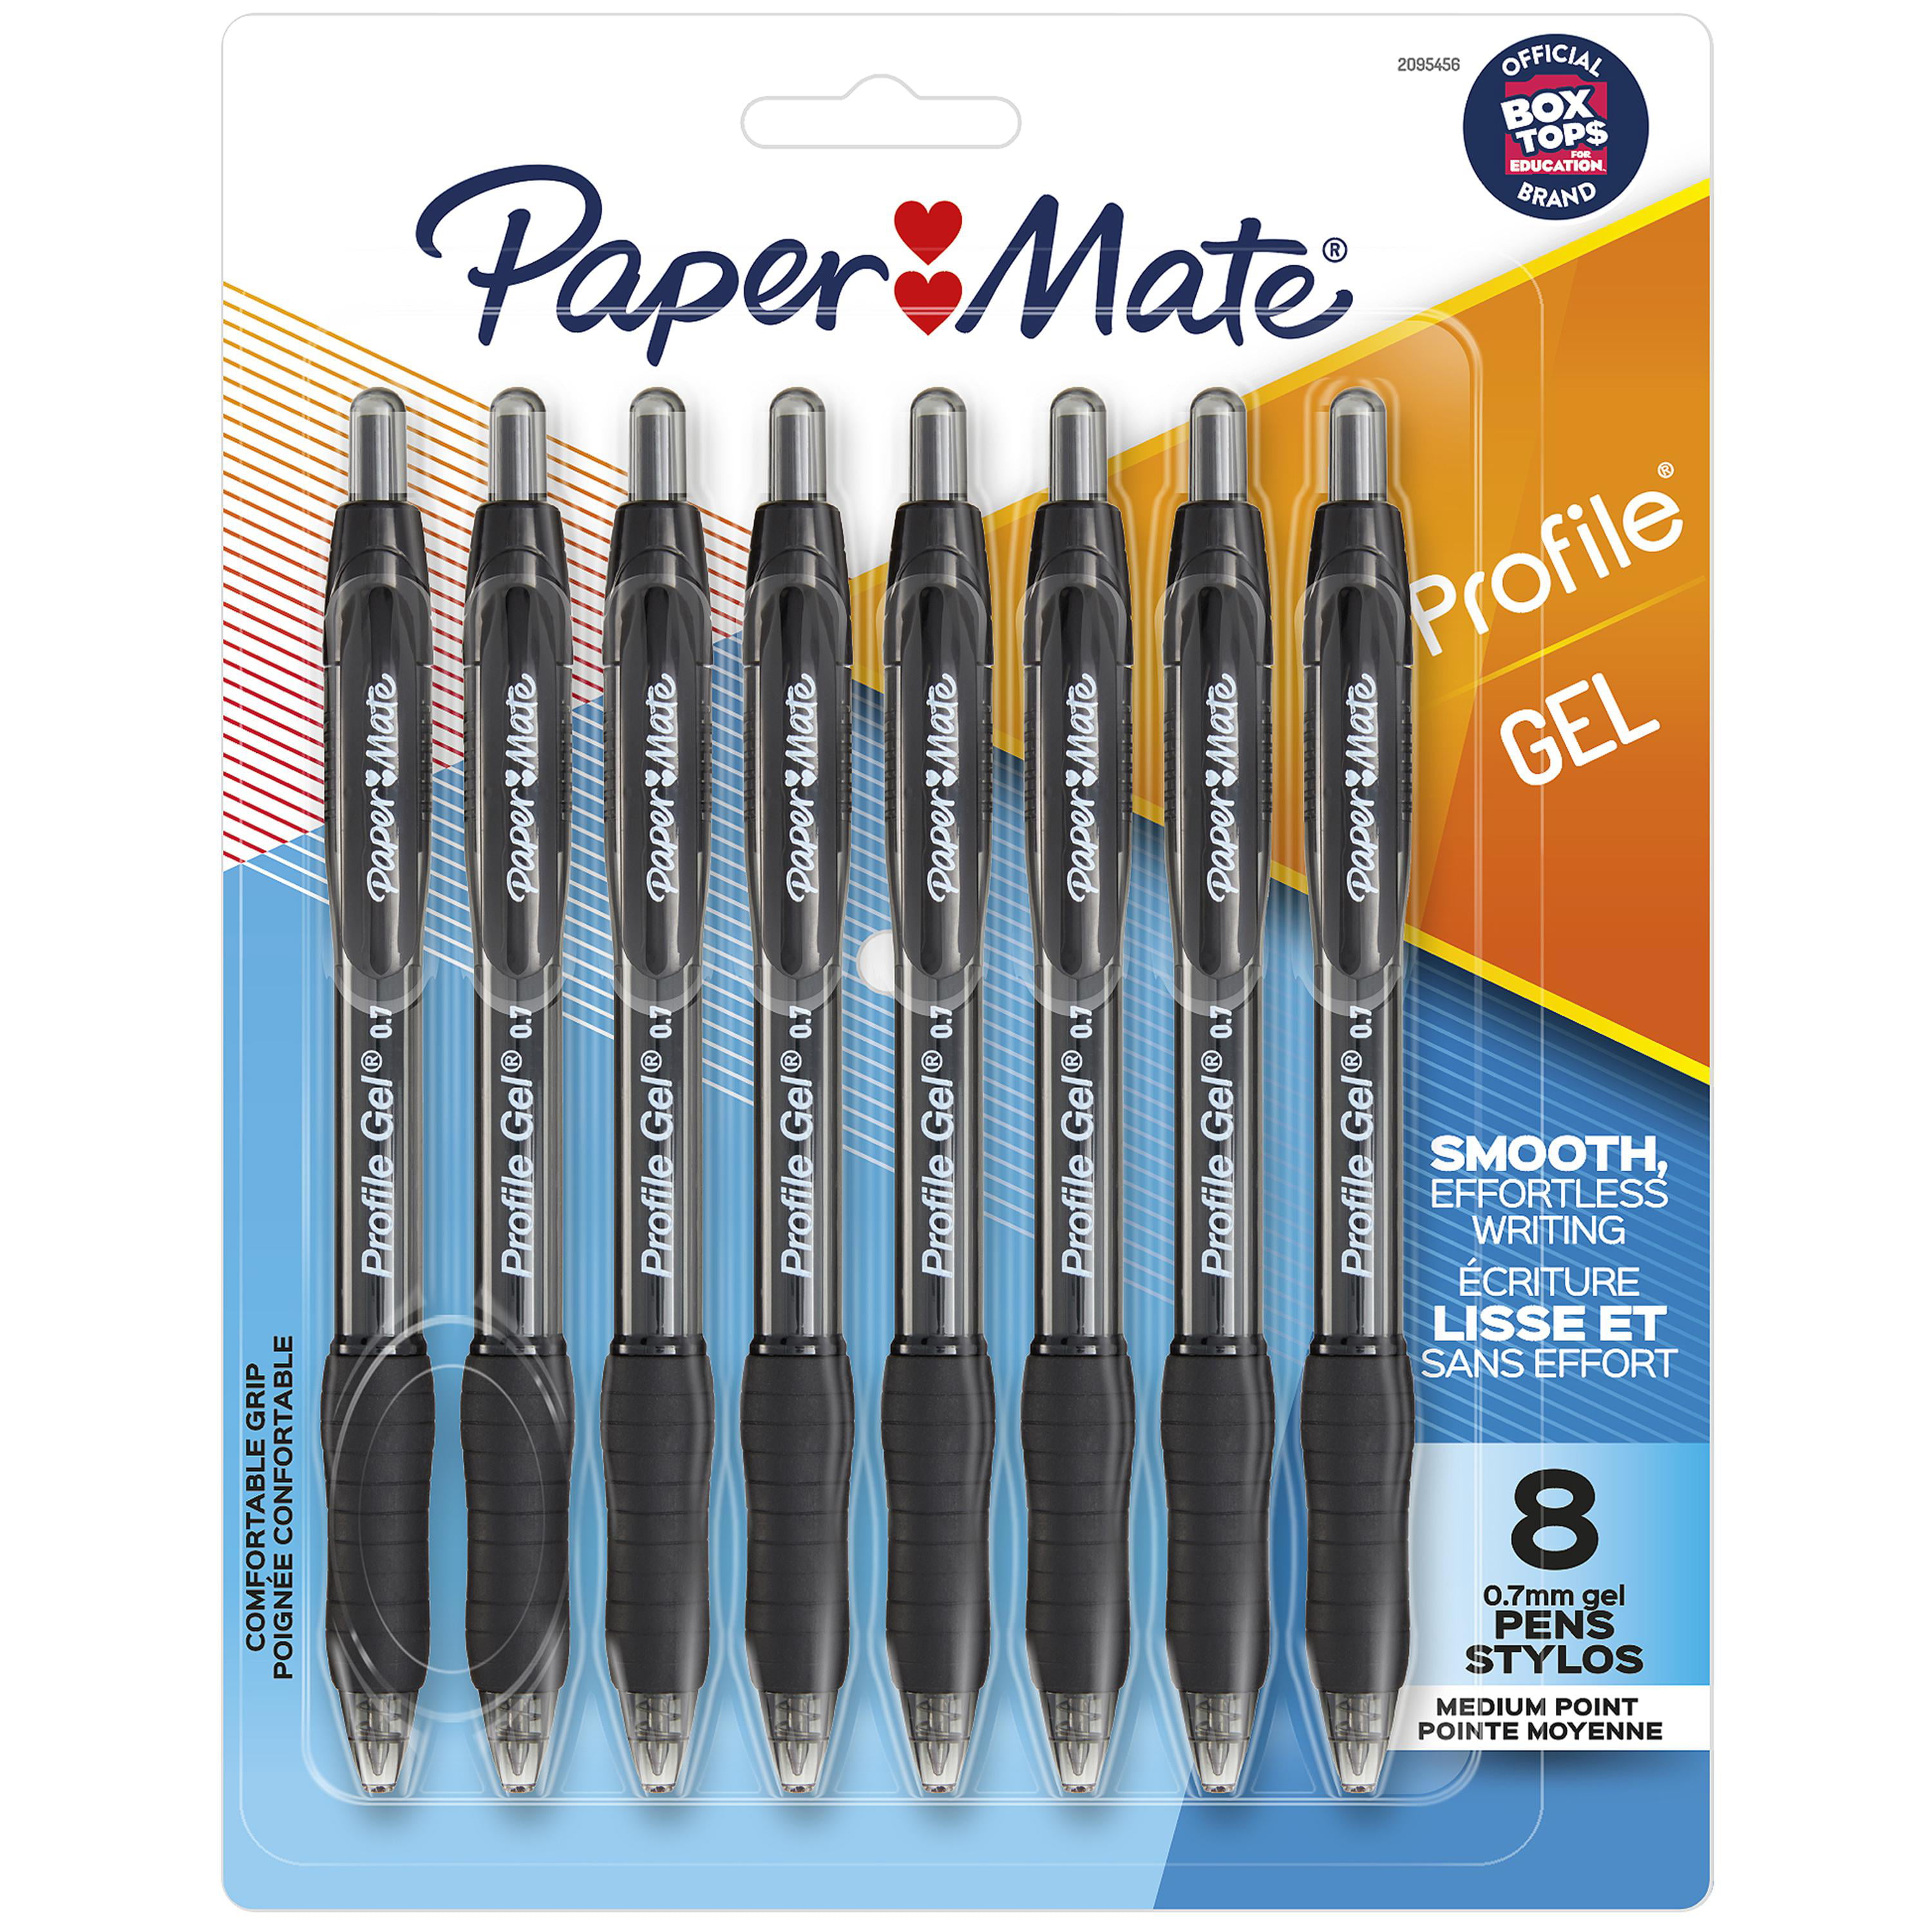 Details about   Paper Mate InkJoy 100RT Retractable Ballpoint Pens Black Ink Medium 12-Pack 